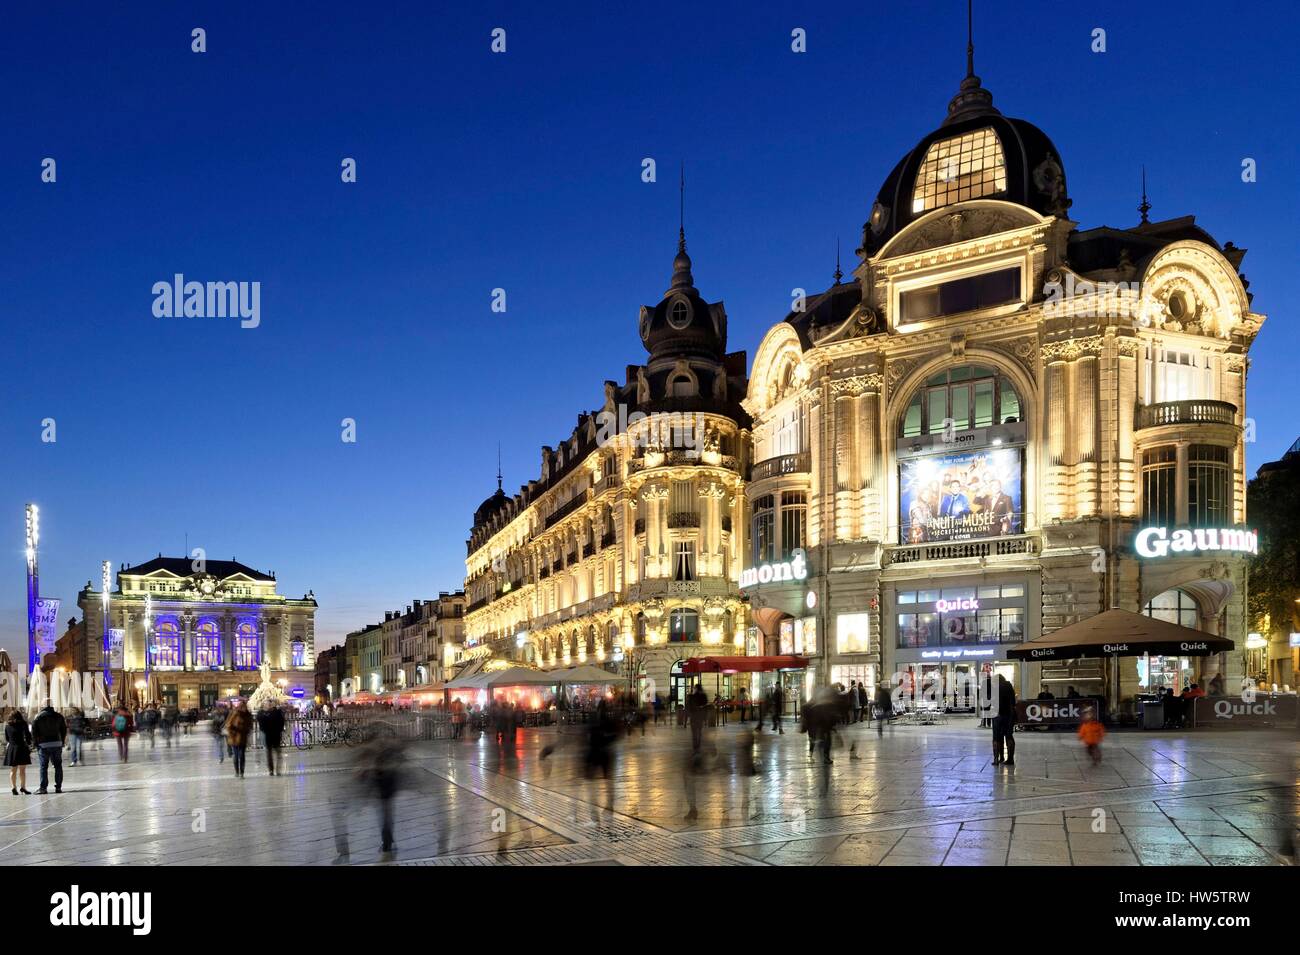 France, Herault, Montpellier, historical center, the Ecusson, Place de la Comedie (Comedy Square) with the Opera Stock Photo